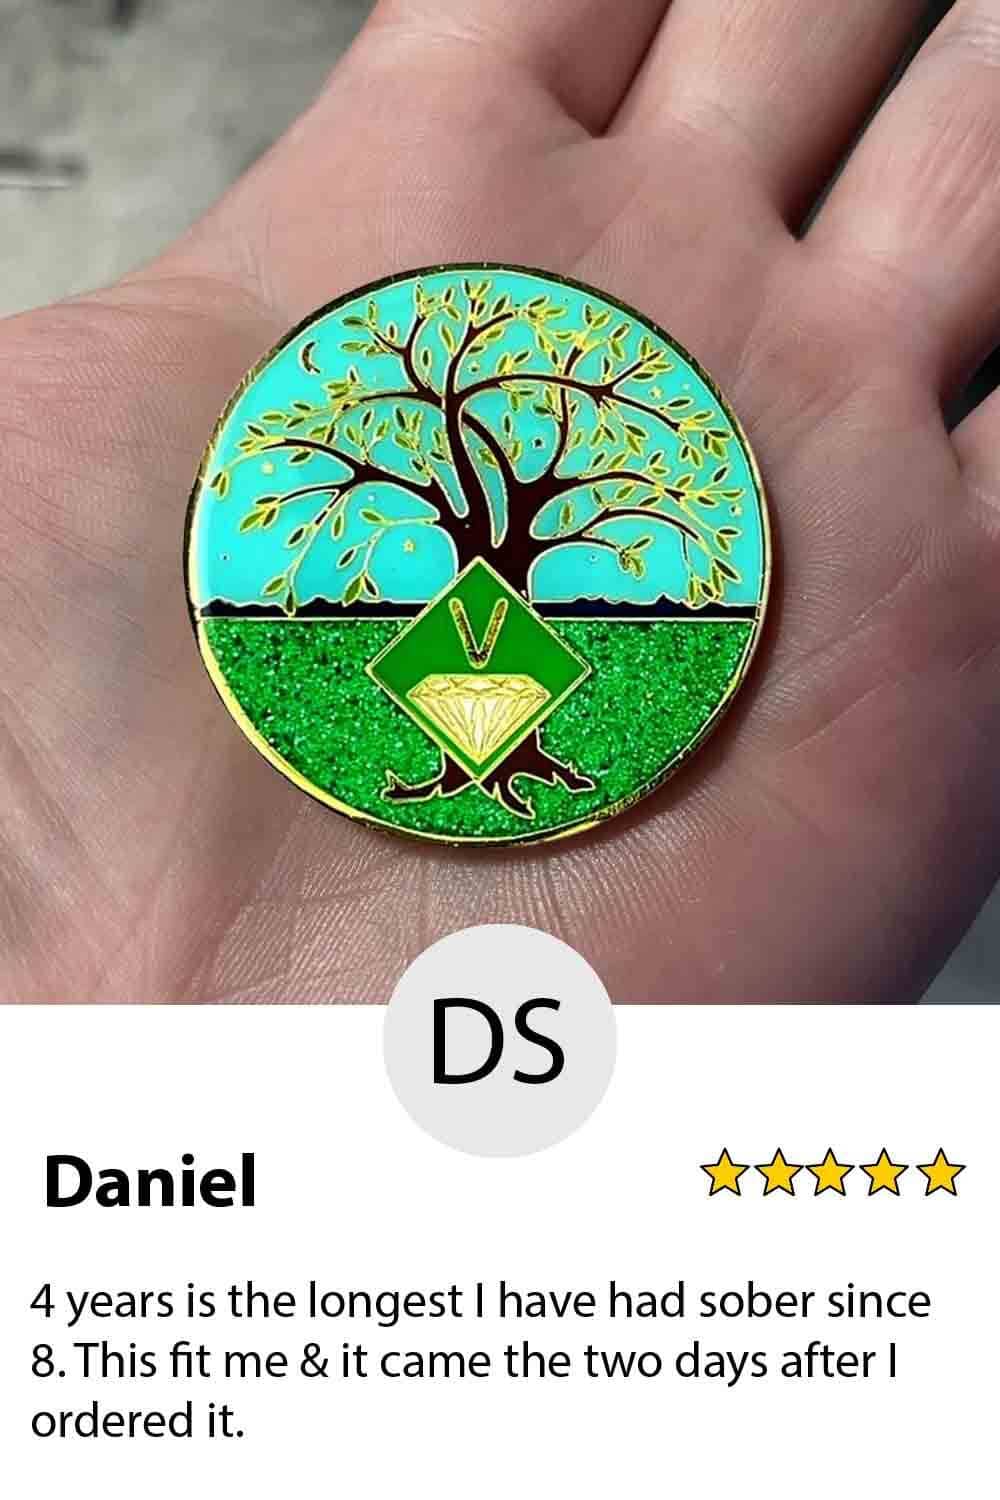 A person holding a coin with the name daniel on it.